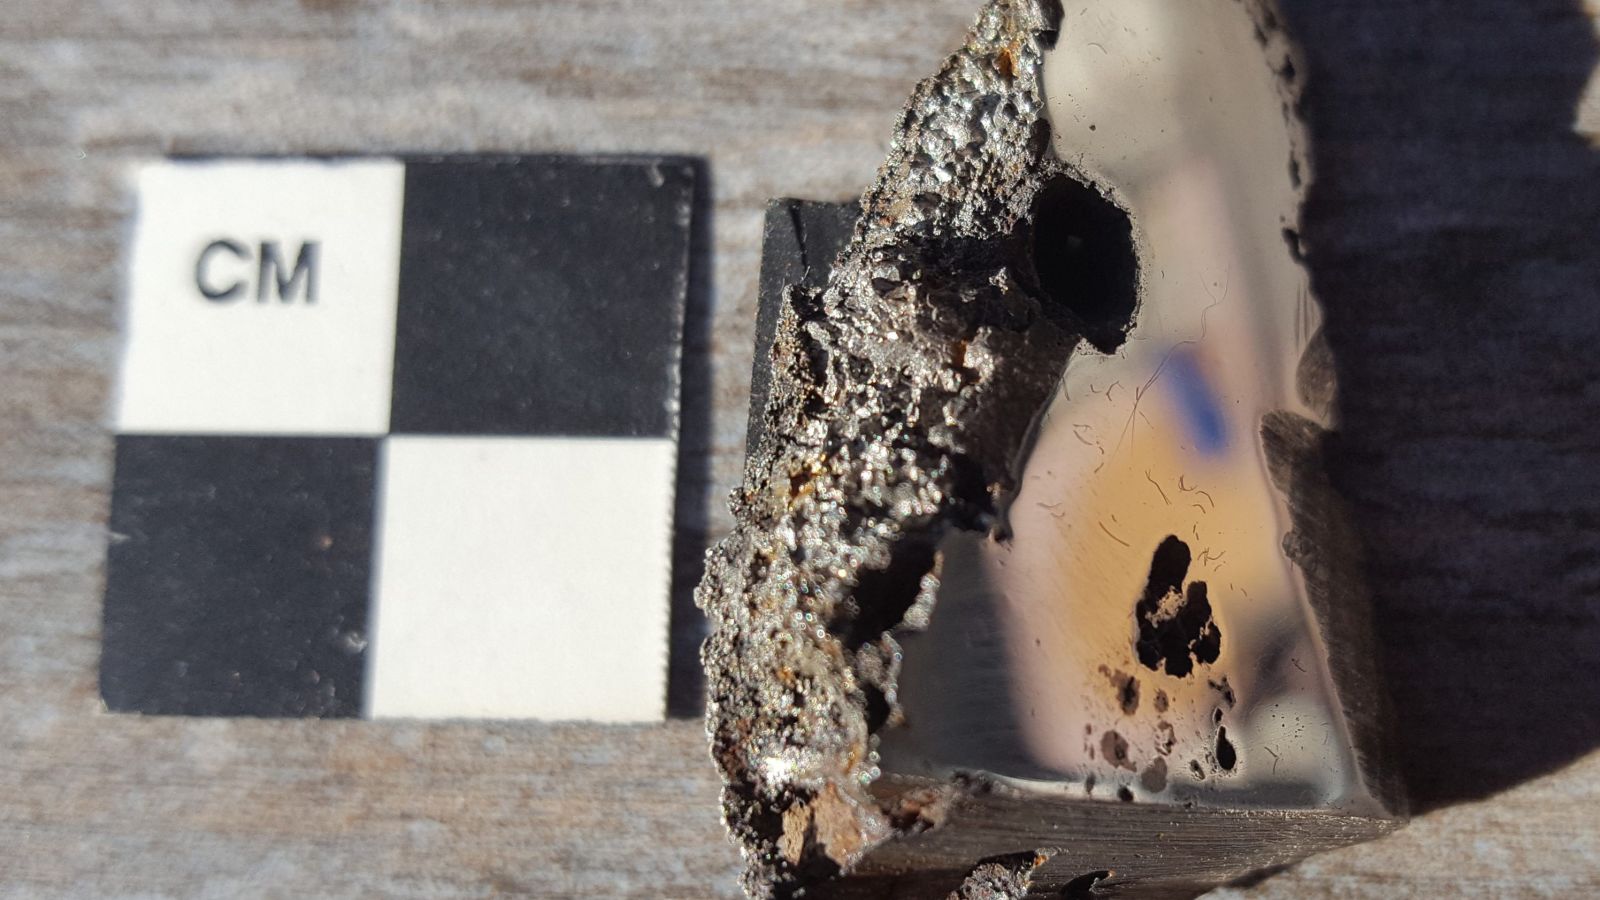 Two new minerals have been found in a 15-ton meteorite that struck Africa